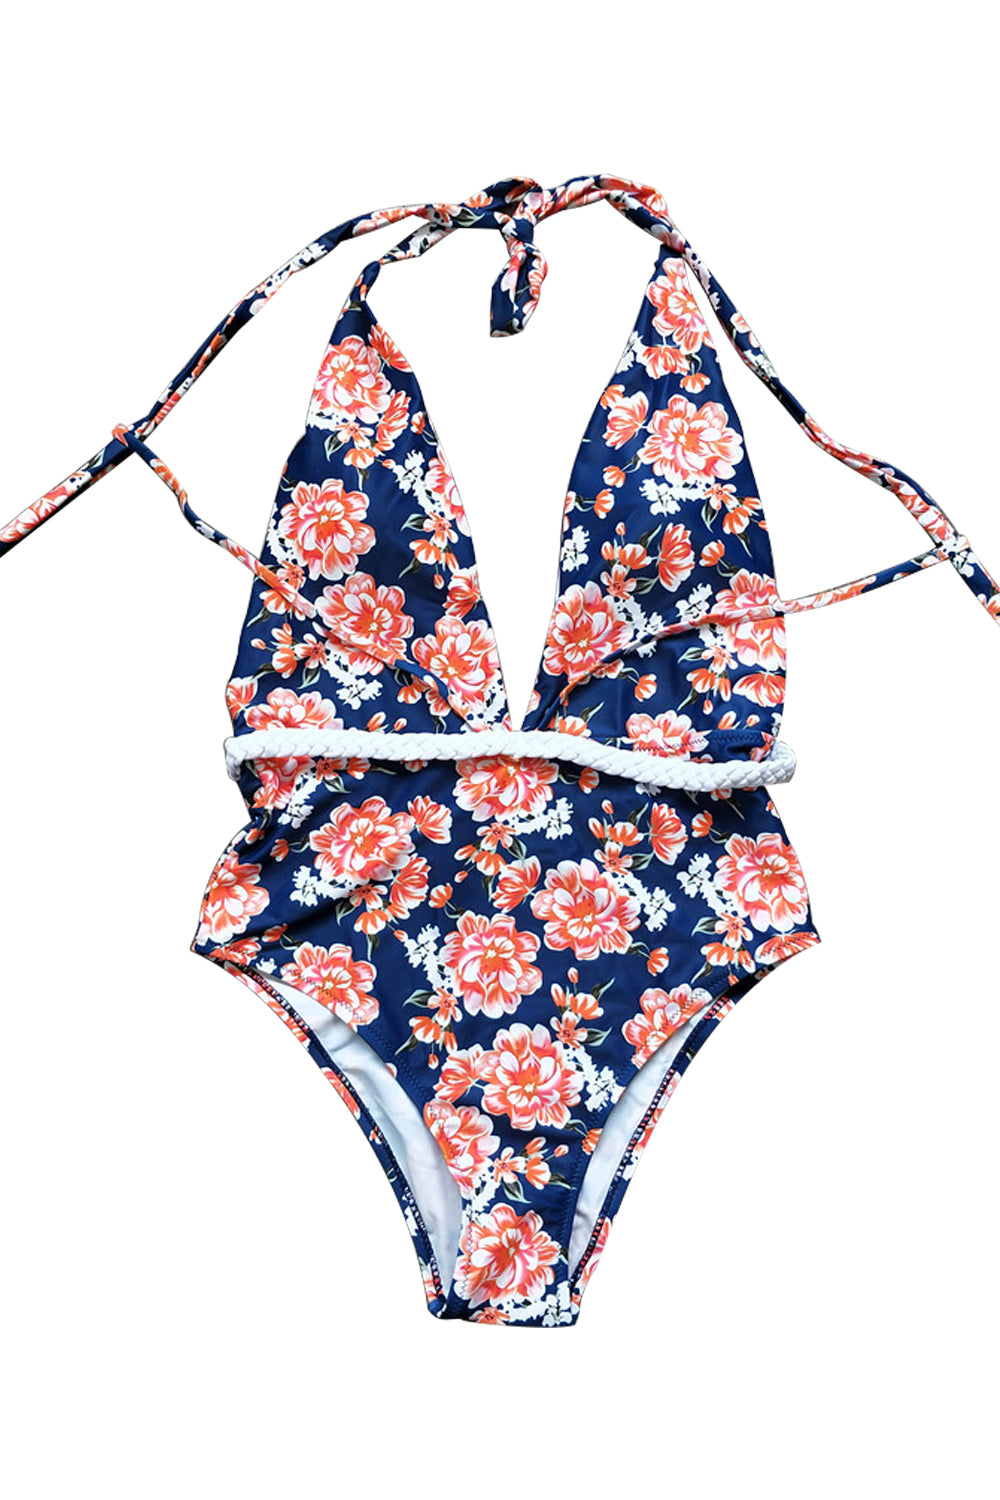 Iyasson Blue Floral Printing With Deep V-neckline One-piece swimsuit